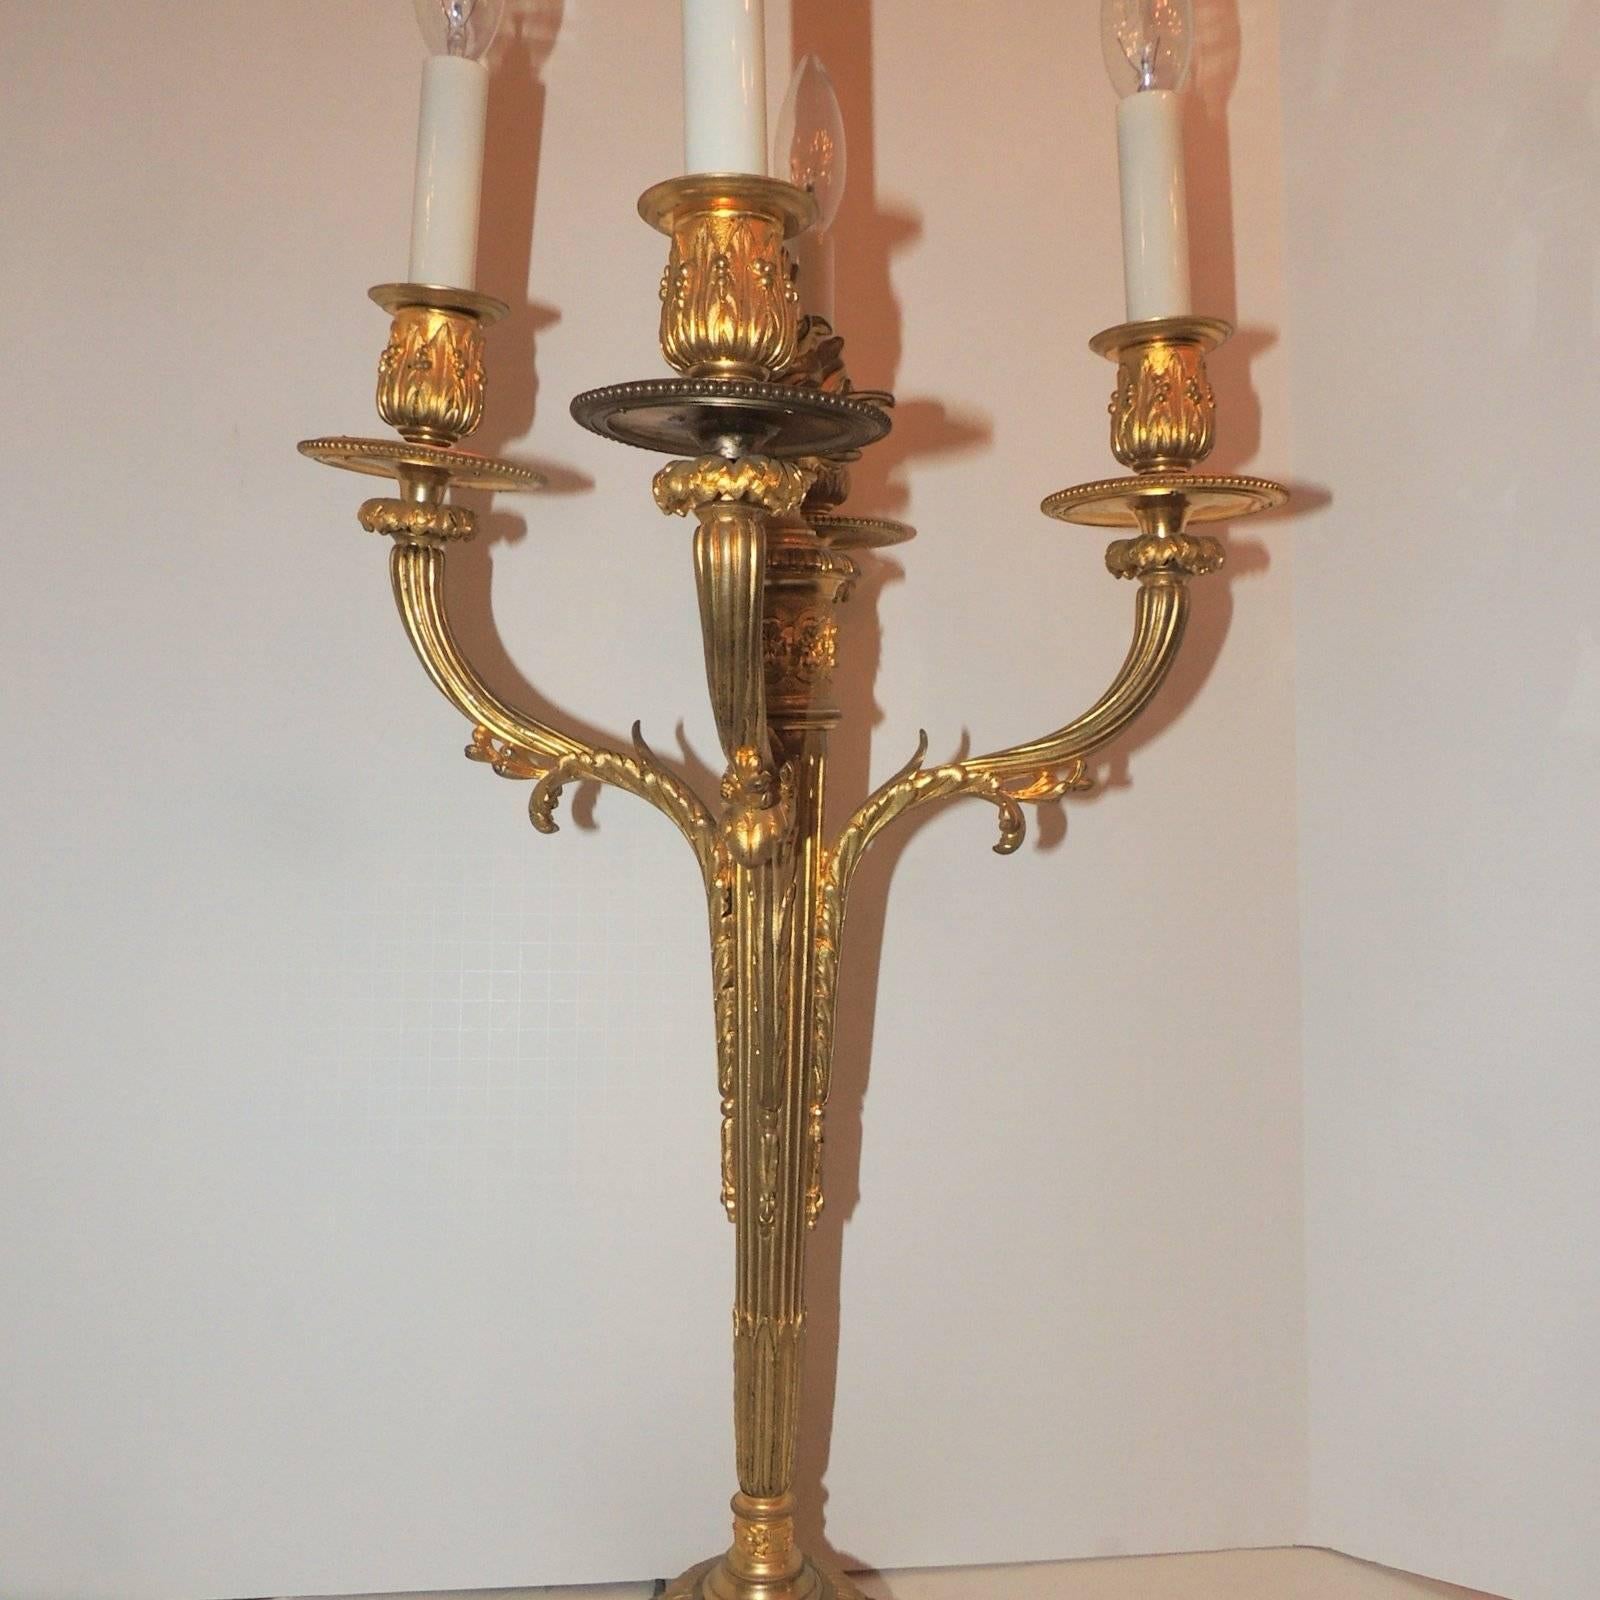 Wonderful Pair French Neoclassical Dore Bronze Regency Four-Arm Candelabra Lamps For Sale 1